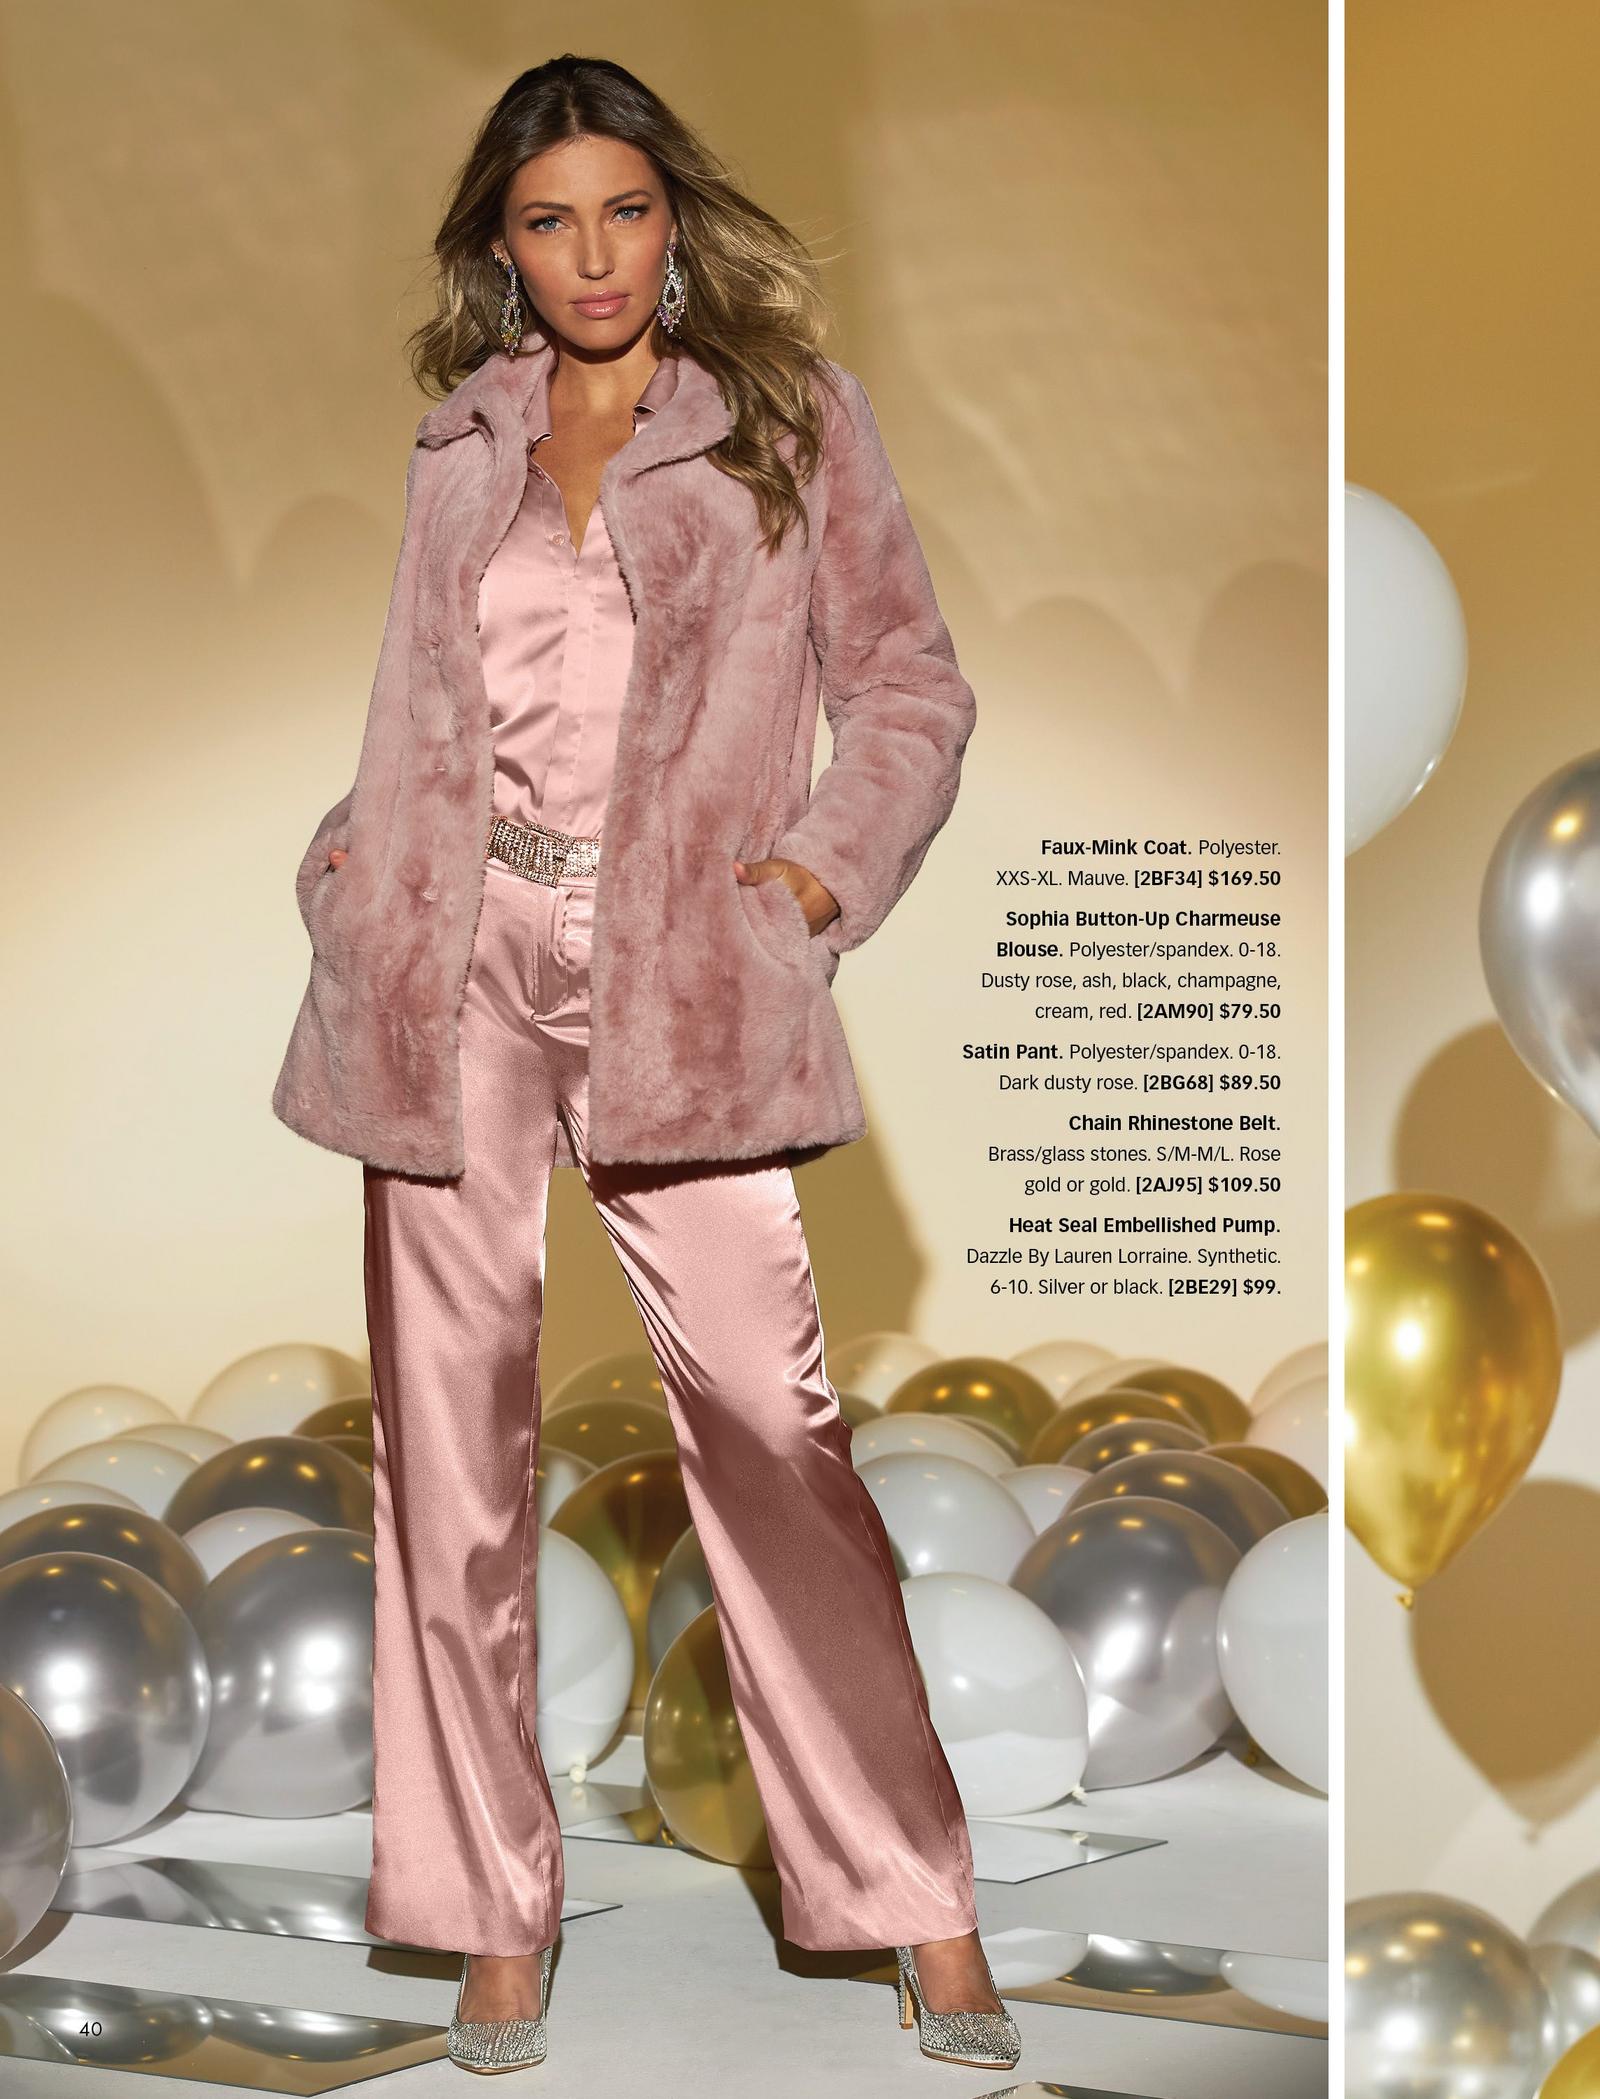 model wearing a light pink faux-fur coat, light pink button-down charmeuse blouse, light pink satin pants, and silver rhinestone pumps.